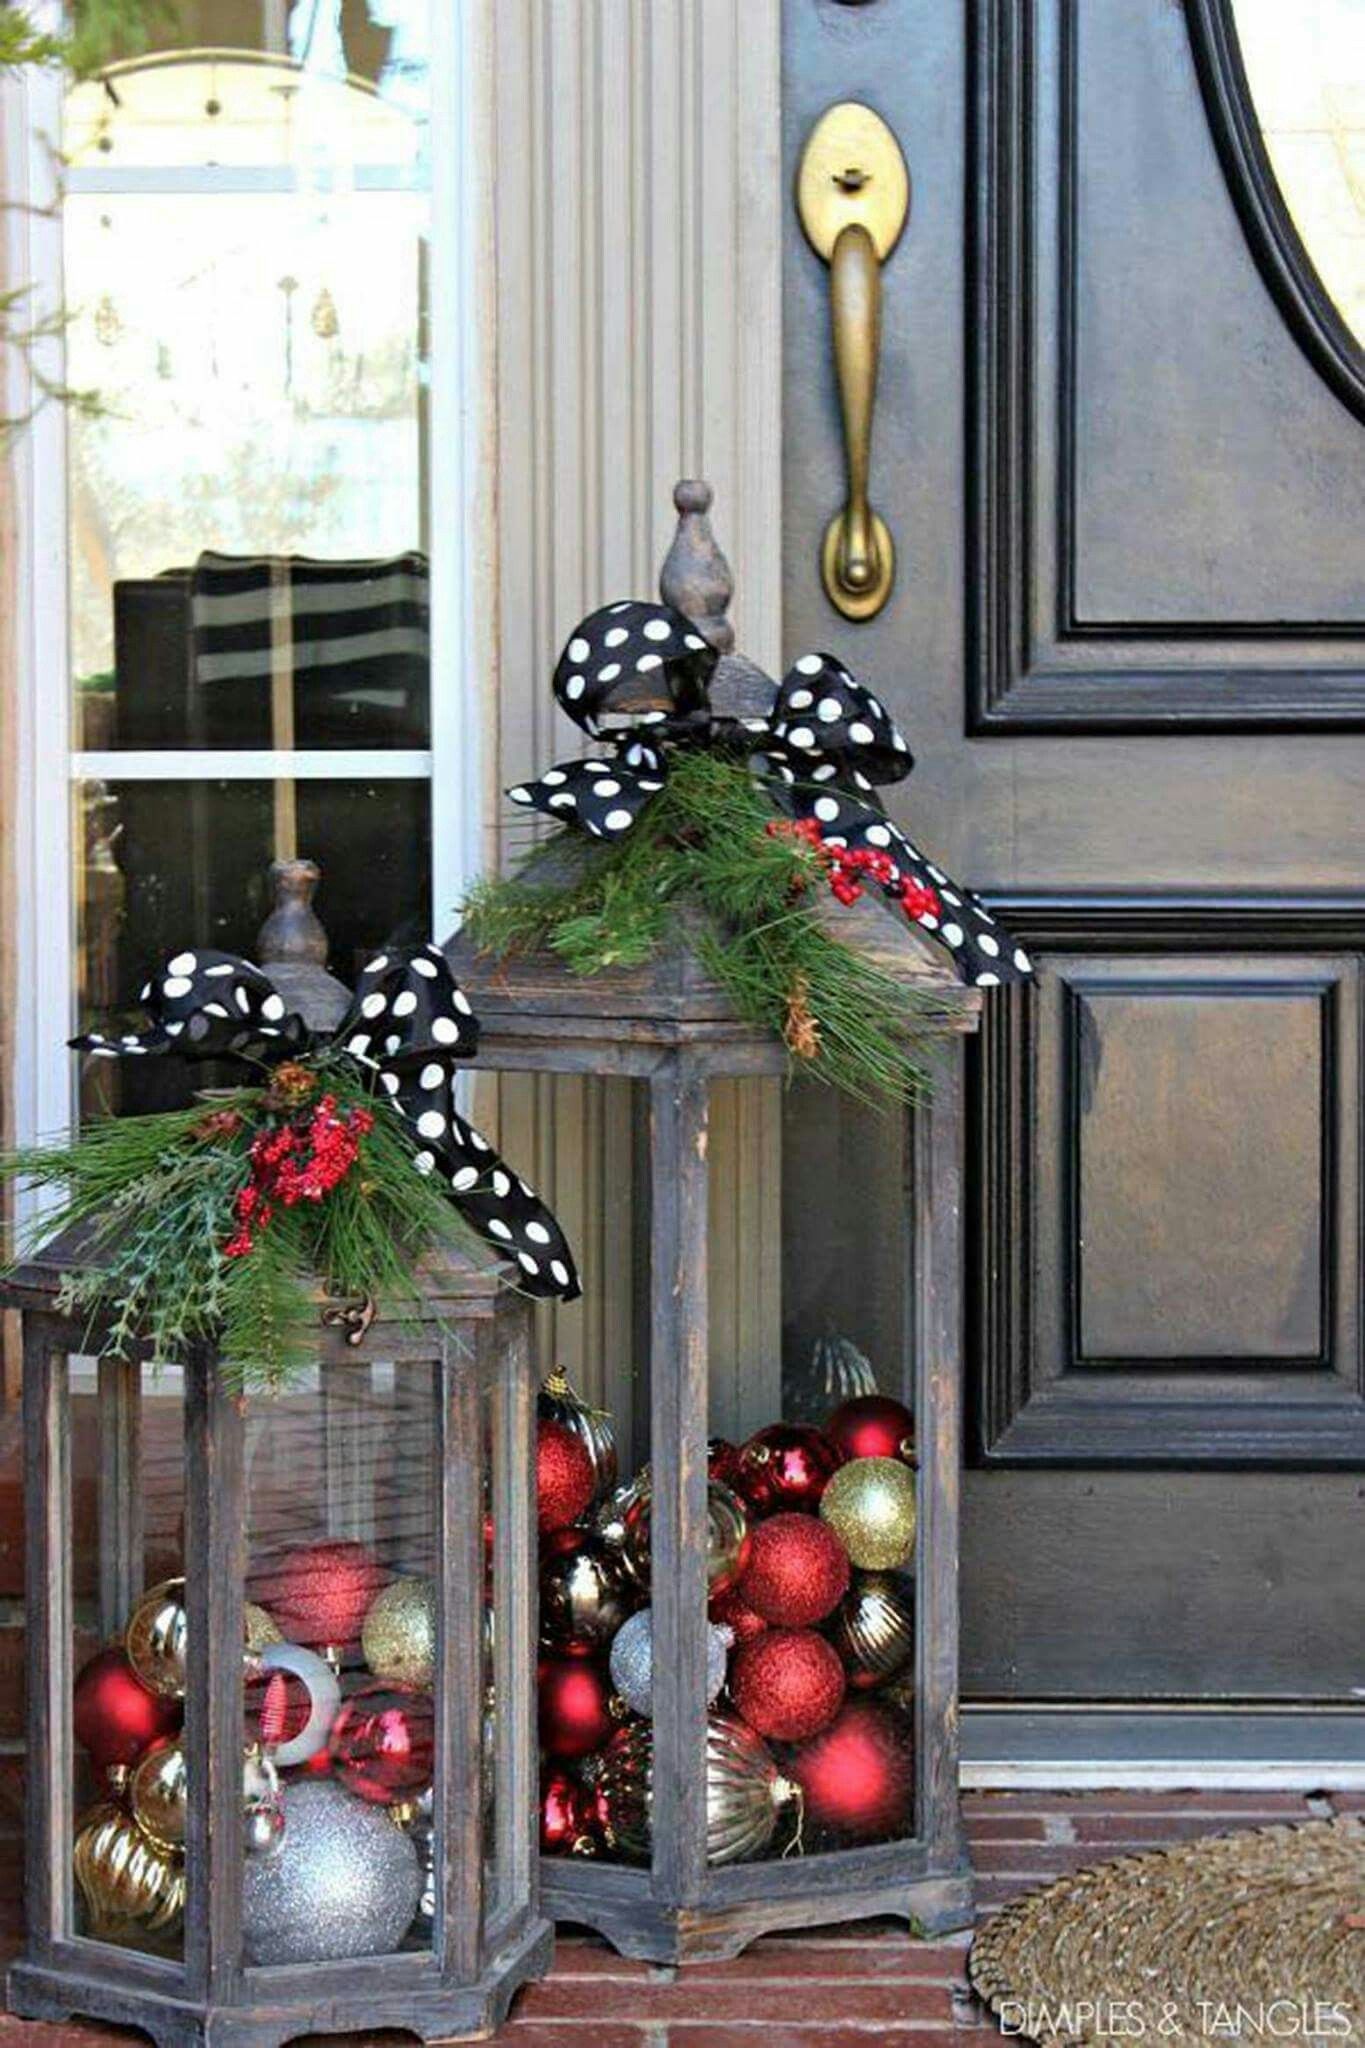 Beautiful Christmas Lanternsthis Is Such A Great Idea For A Pertaining To Outdoor Xmas Lanterns (View 3 of 20)